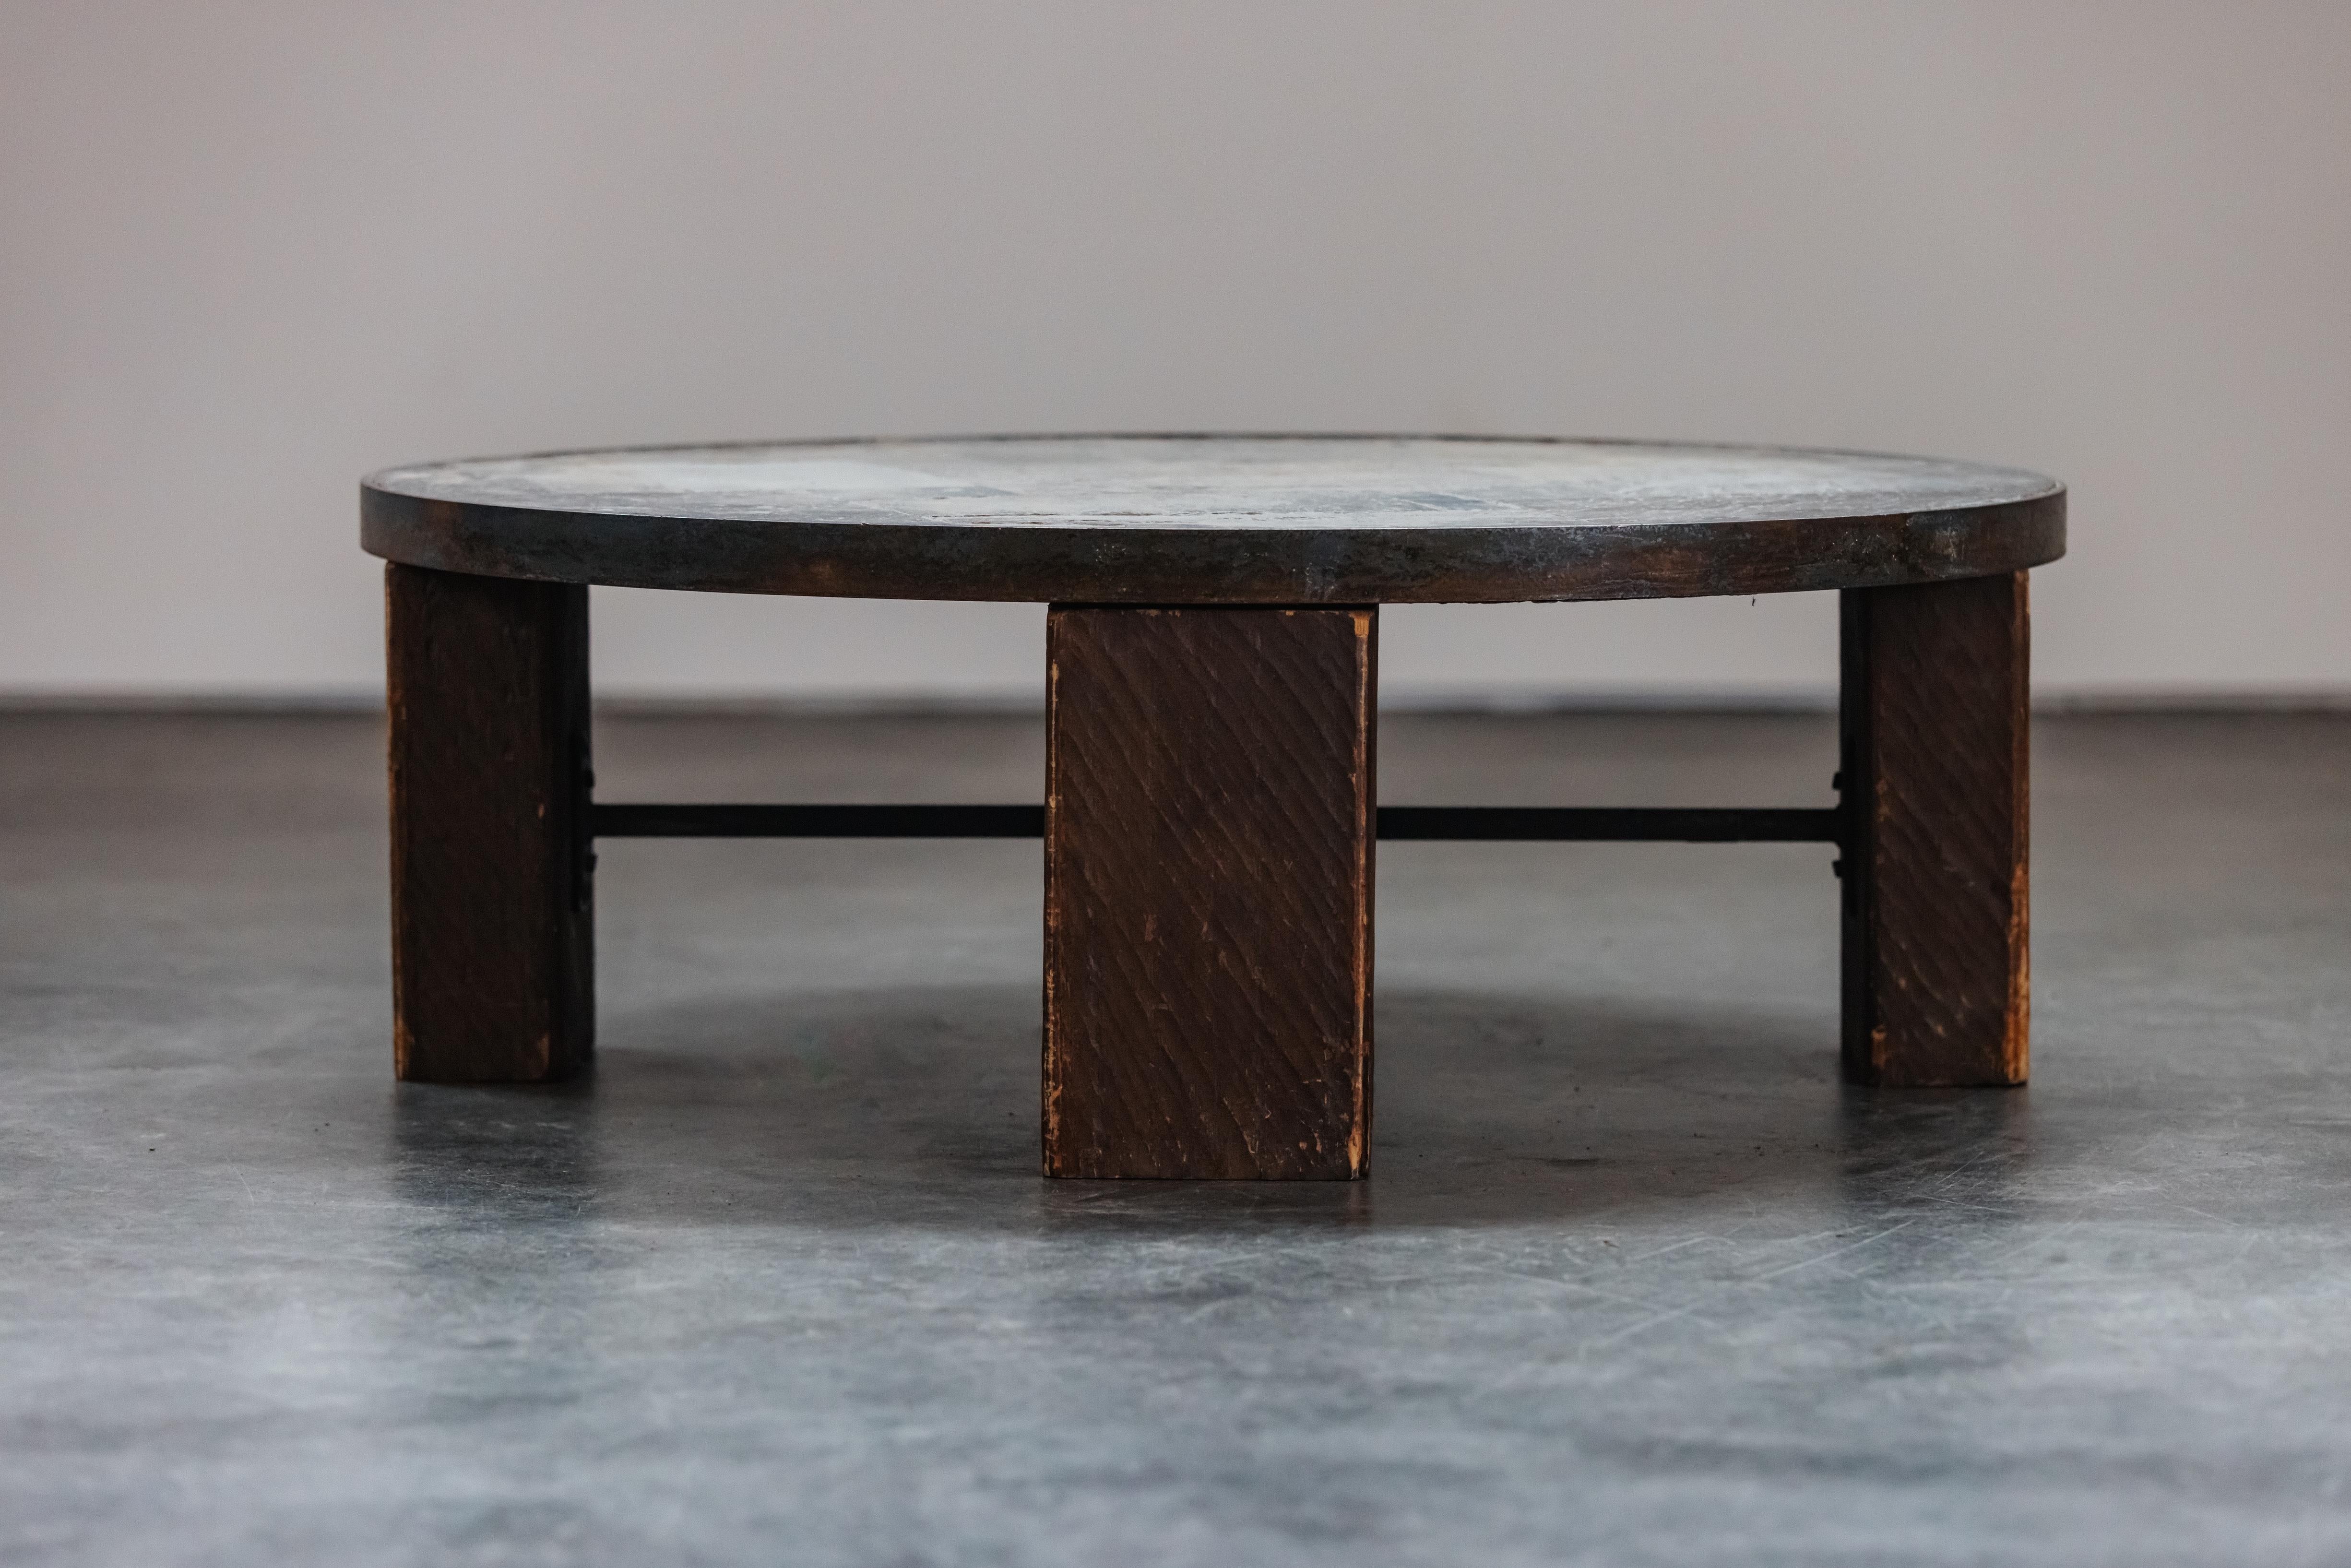 European Vintage Slate Stone Coffee Table From France, Circa 1970